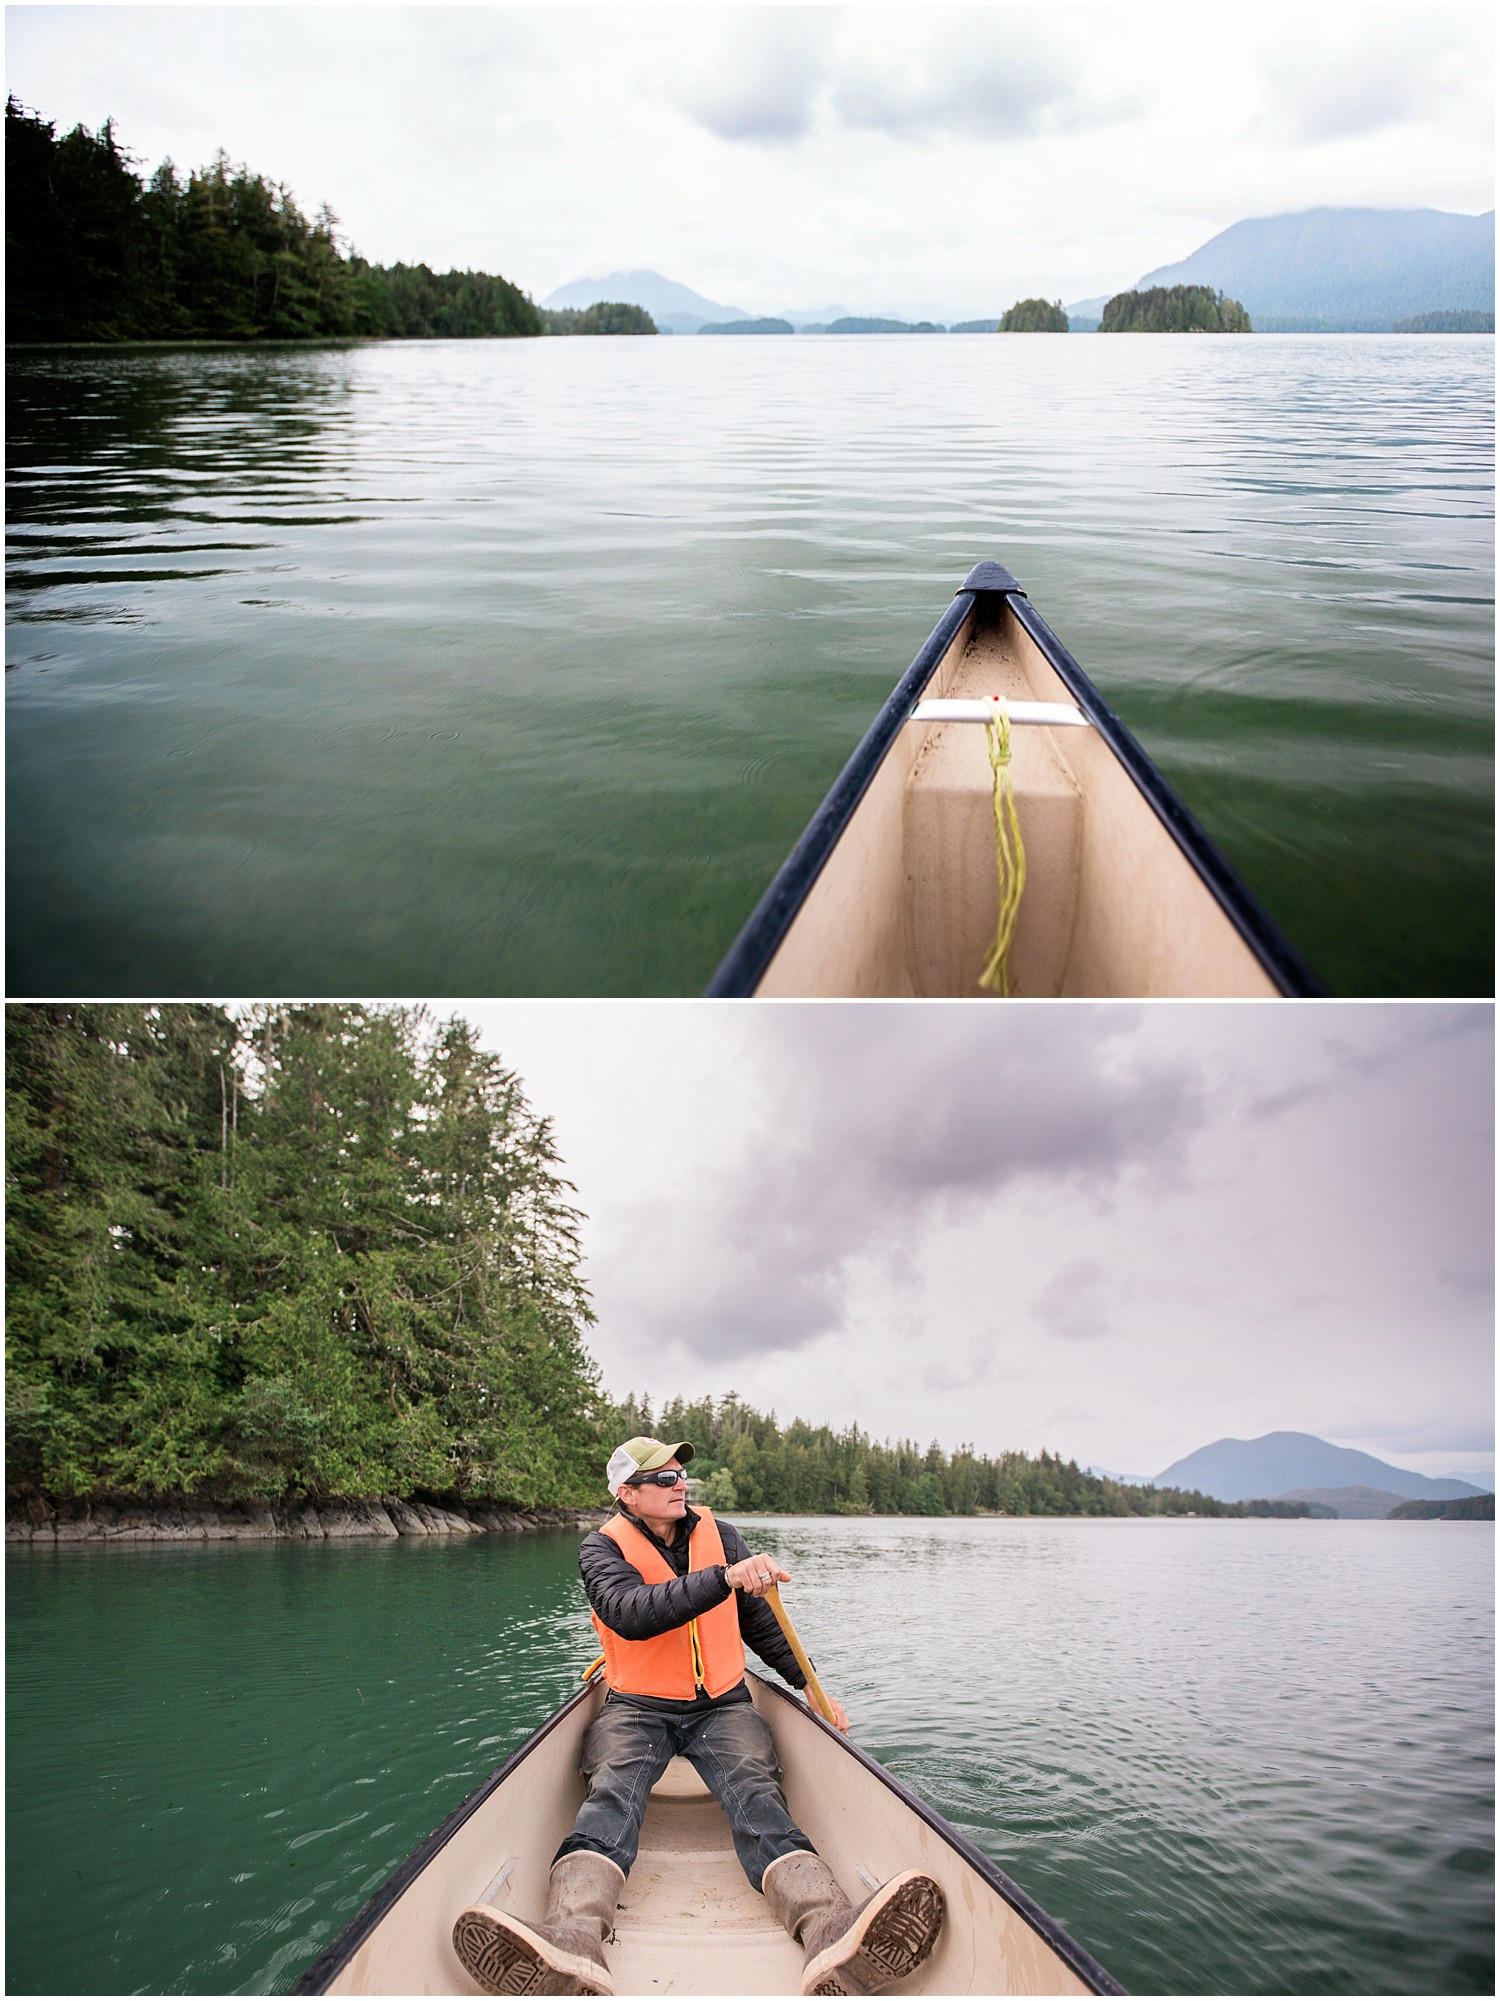 Browning Passage, Tofino Inlet | Vancouver Island | British Columbia, Canada | Jamie V Photography